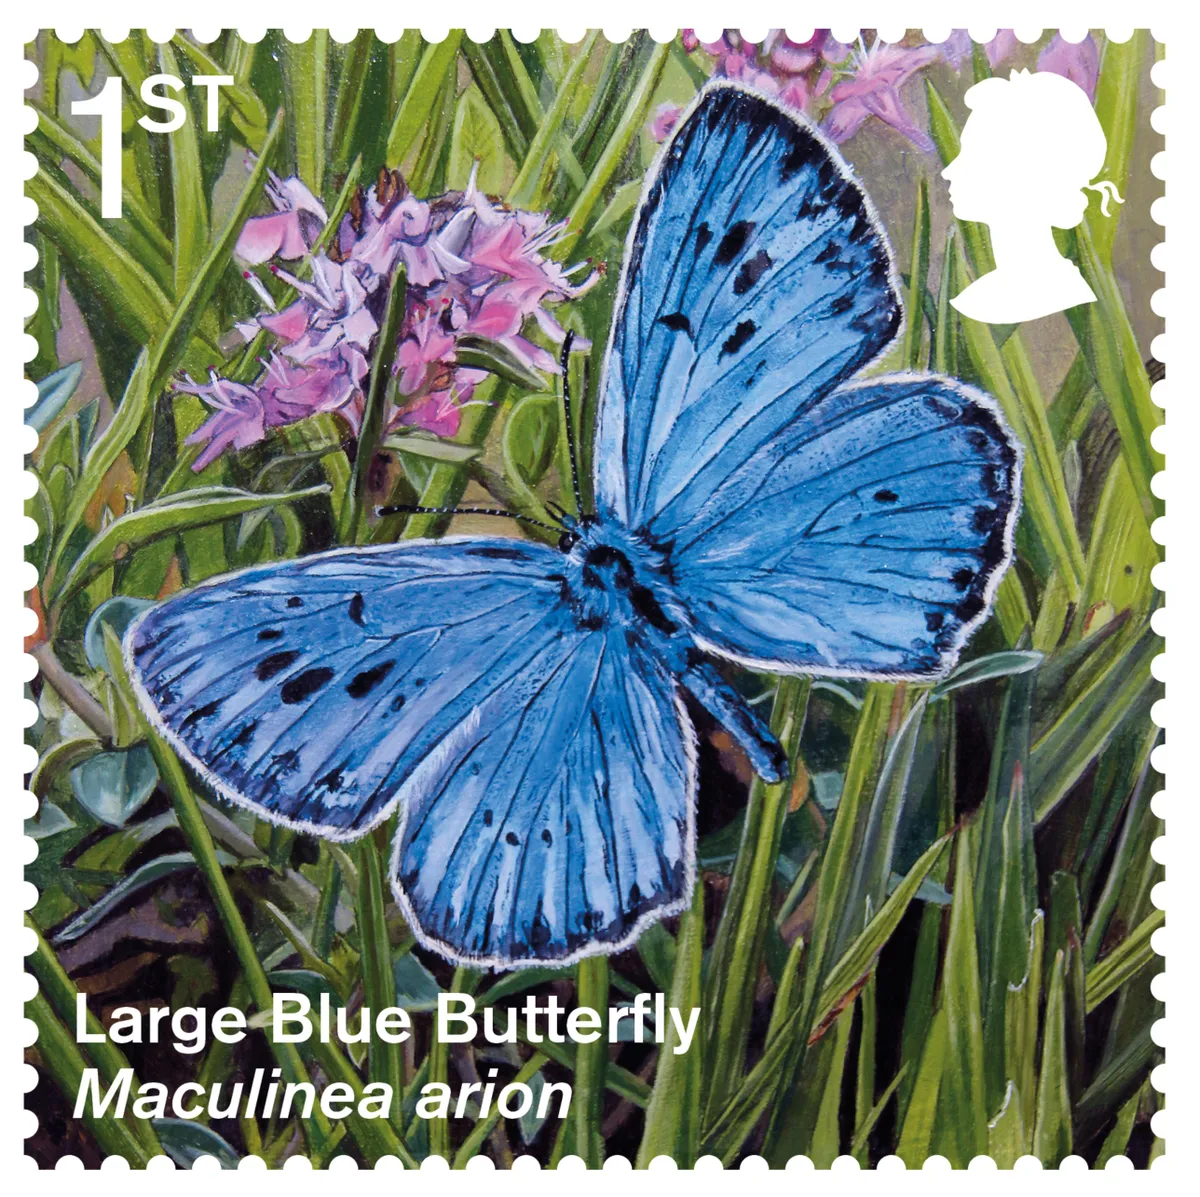 Large-Blue butterfly stamp